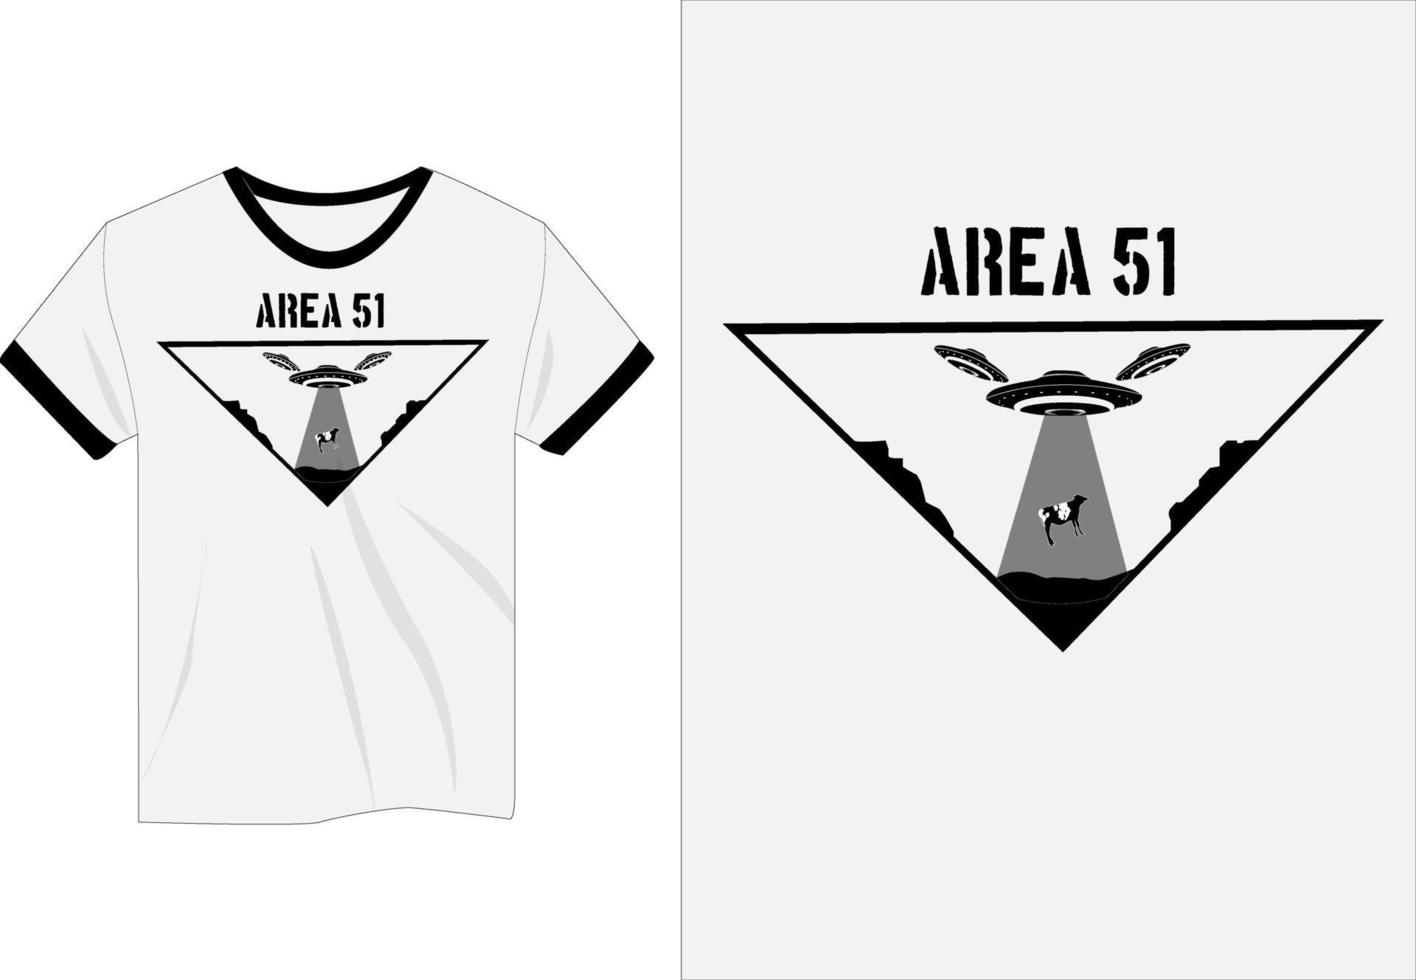 AREA 51 flying saucer pulling up a cow t shirt design vector